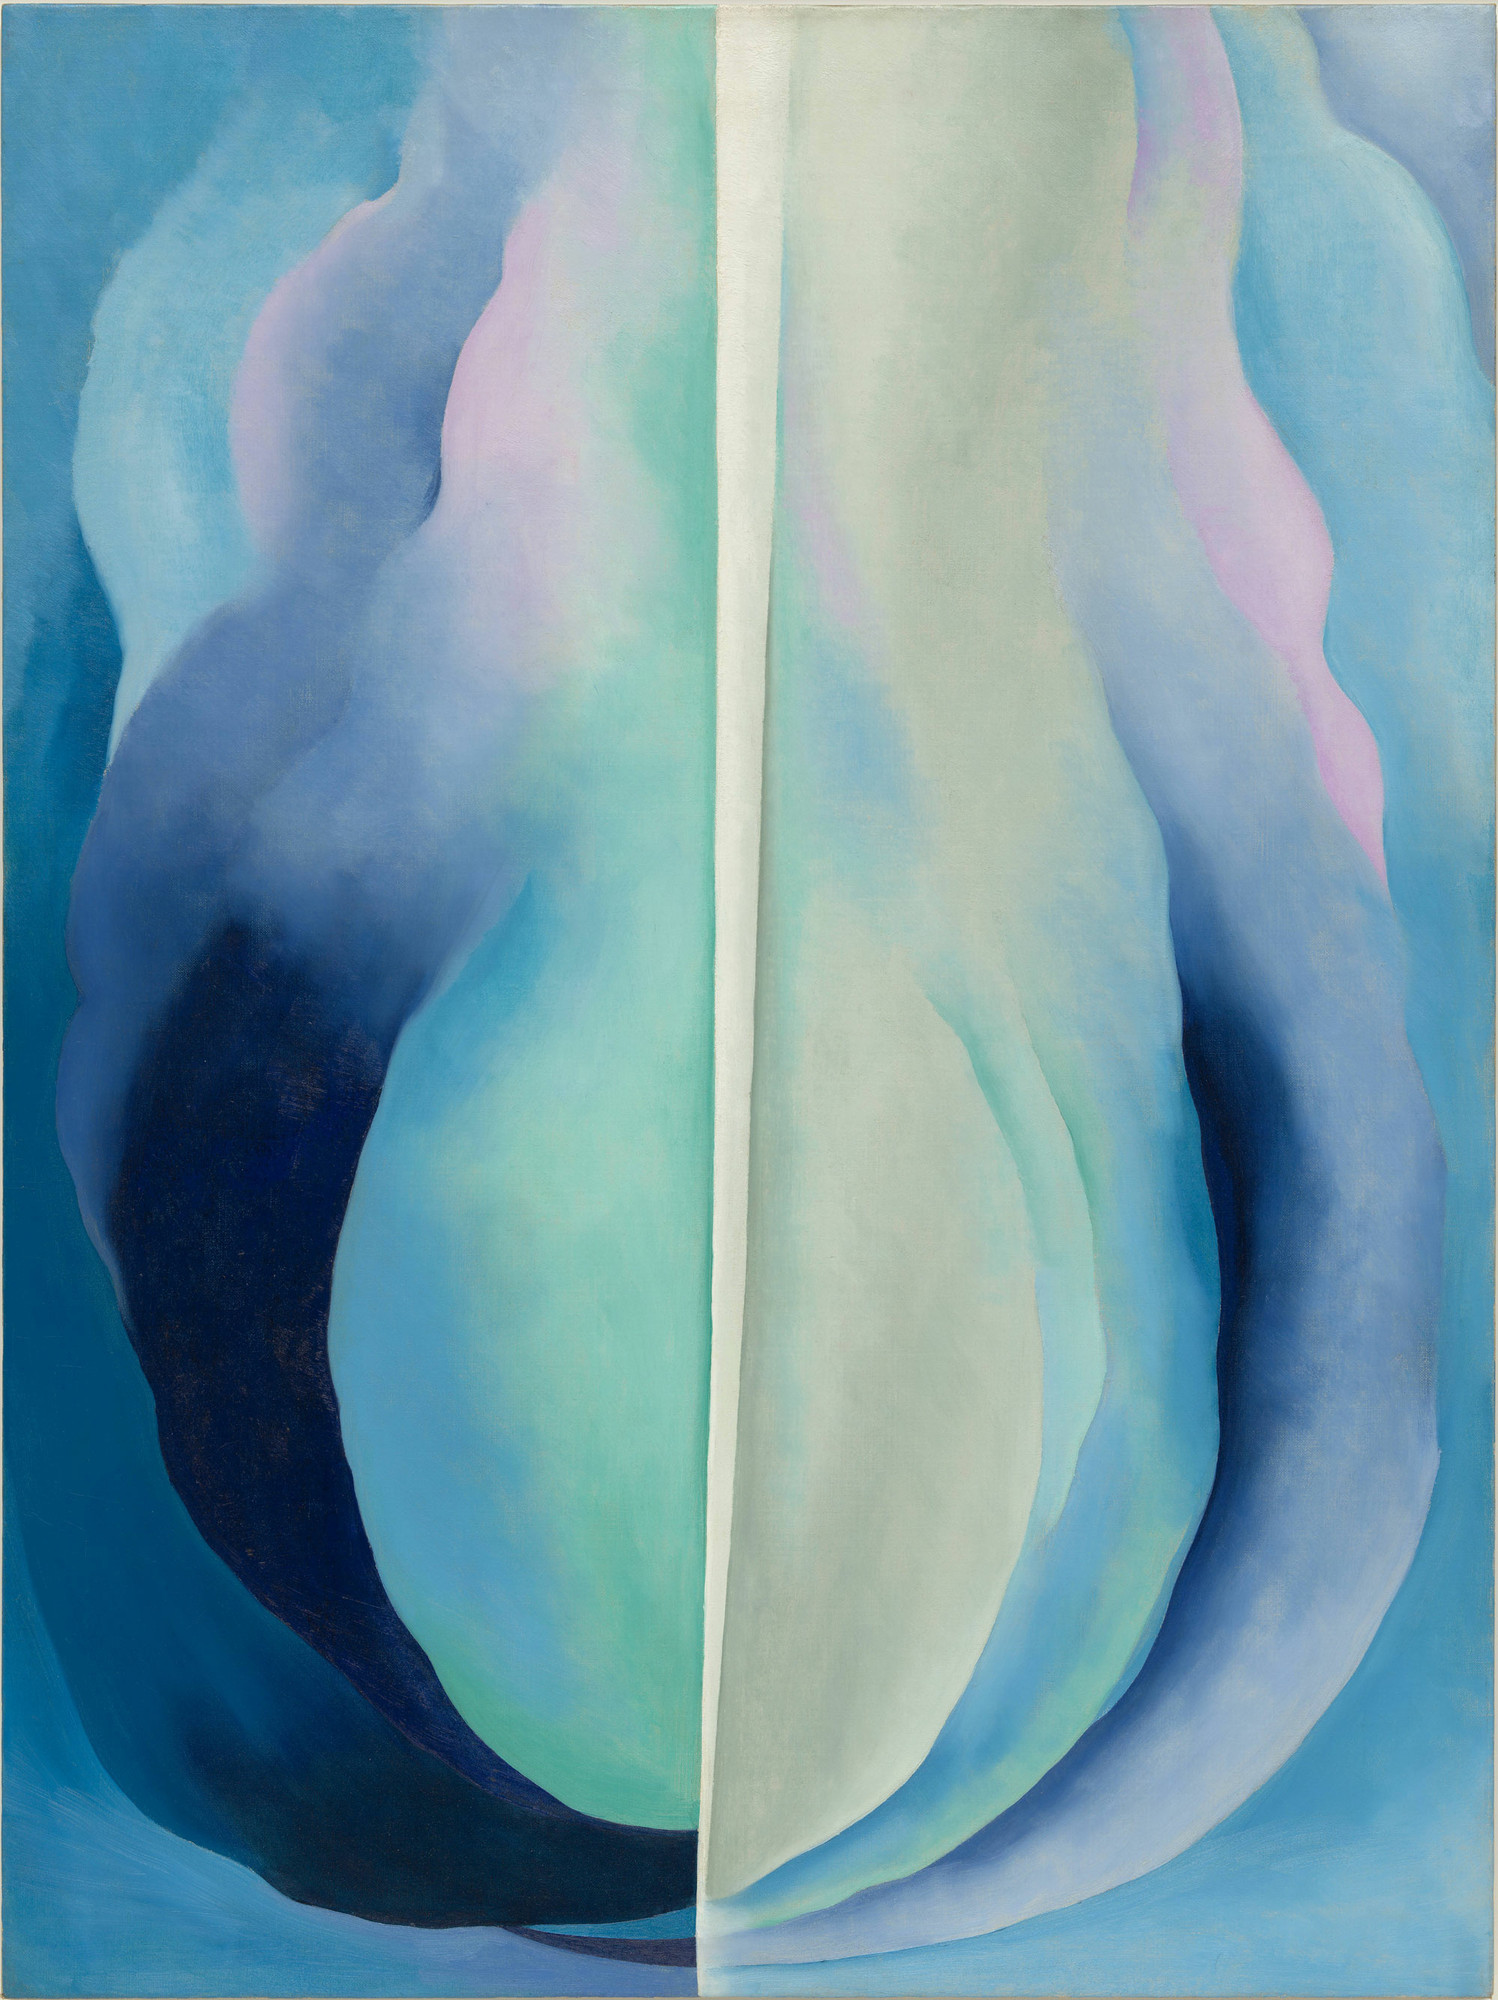 Definite Form for Intangible Things O’Keeffe’s Abstraction